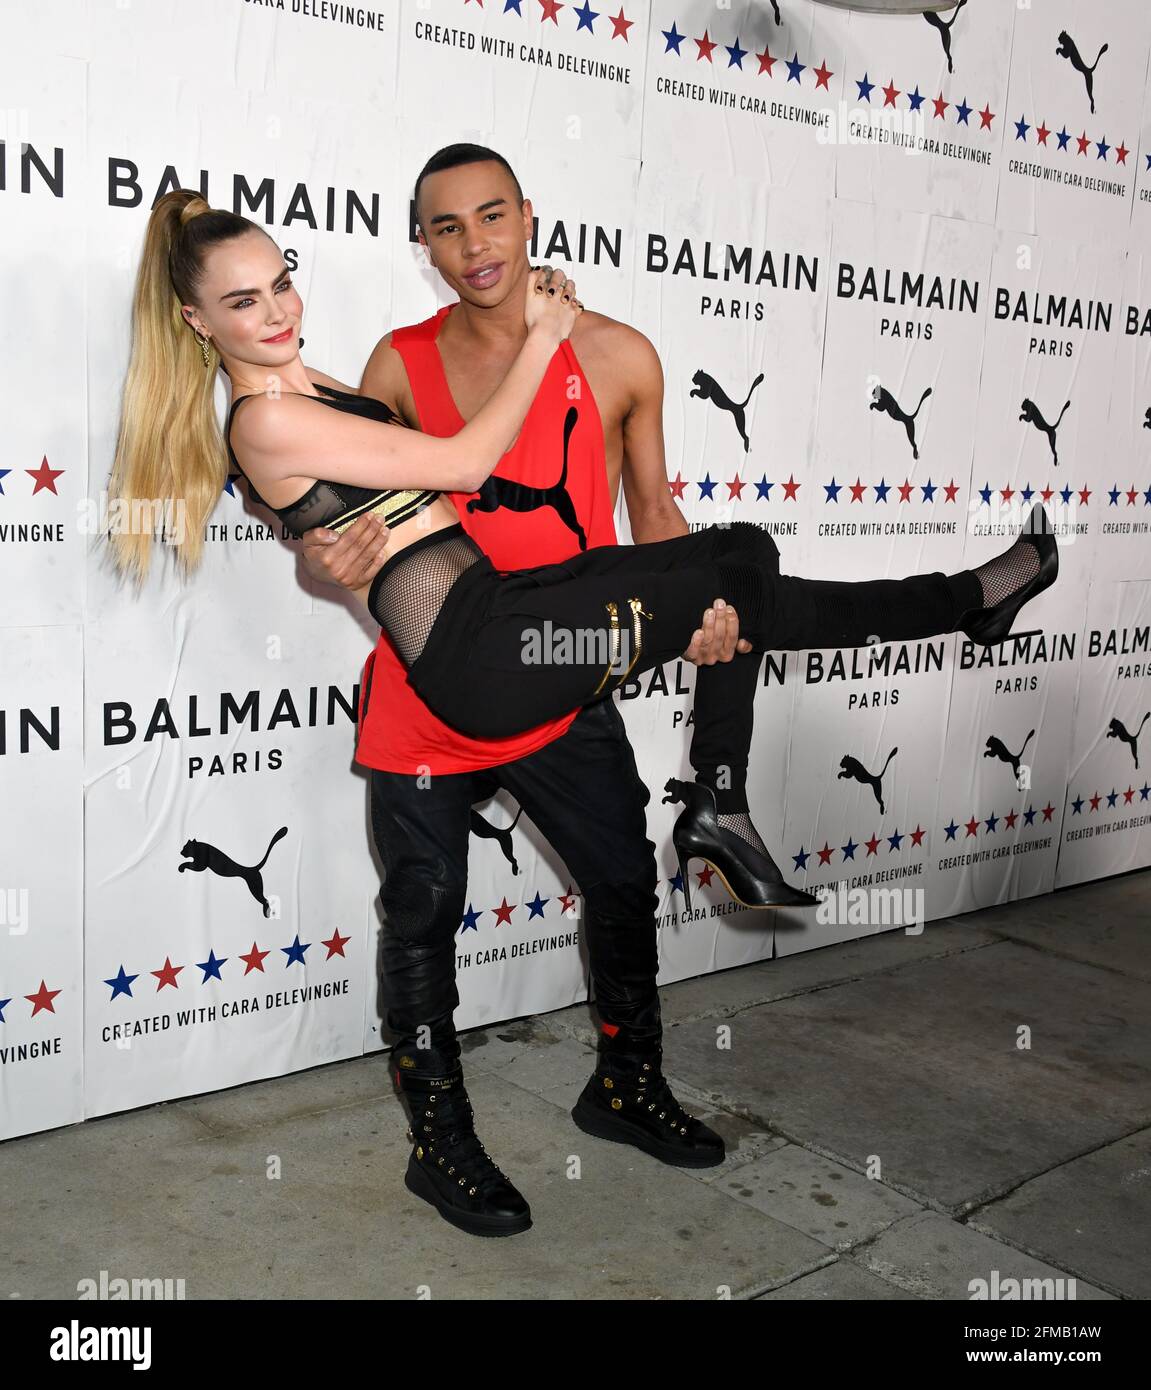 Launch of Puma X Balmain collaboration created by Cara Delevingne and  Olivier Rousteing, held at Milk Studios in Los Angeles, Thursday, November  21, 2019. Jennifer Graylock-Graylock.com Stock Photo - Alamy